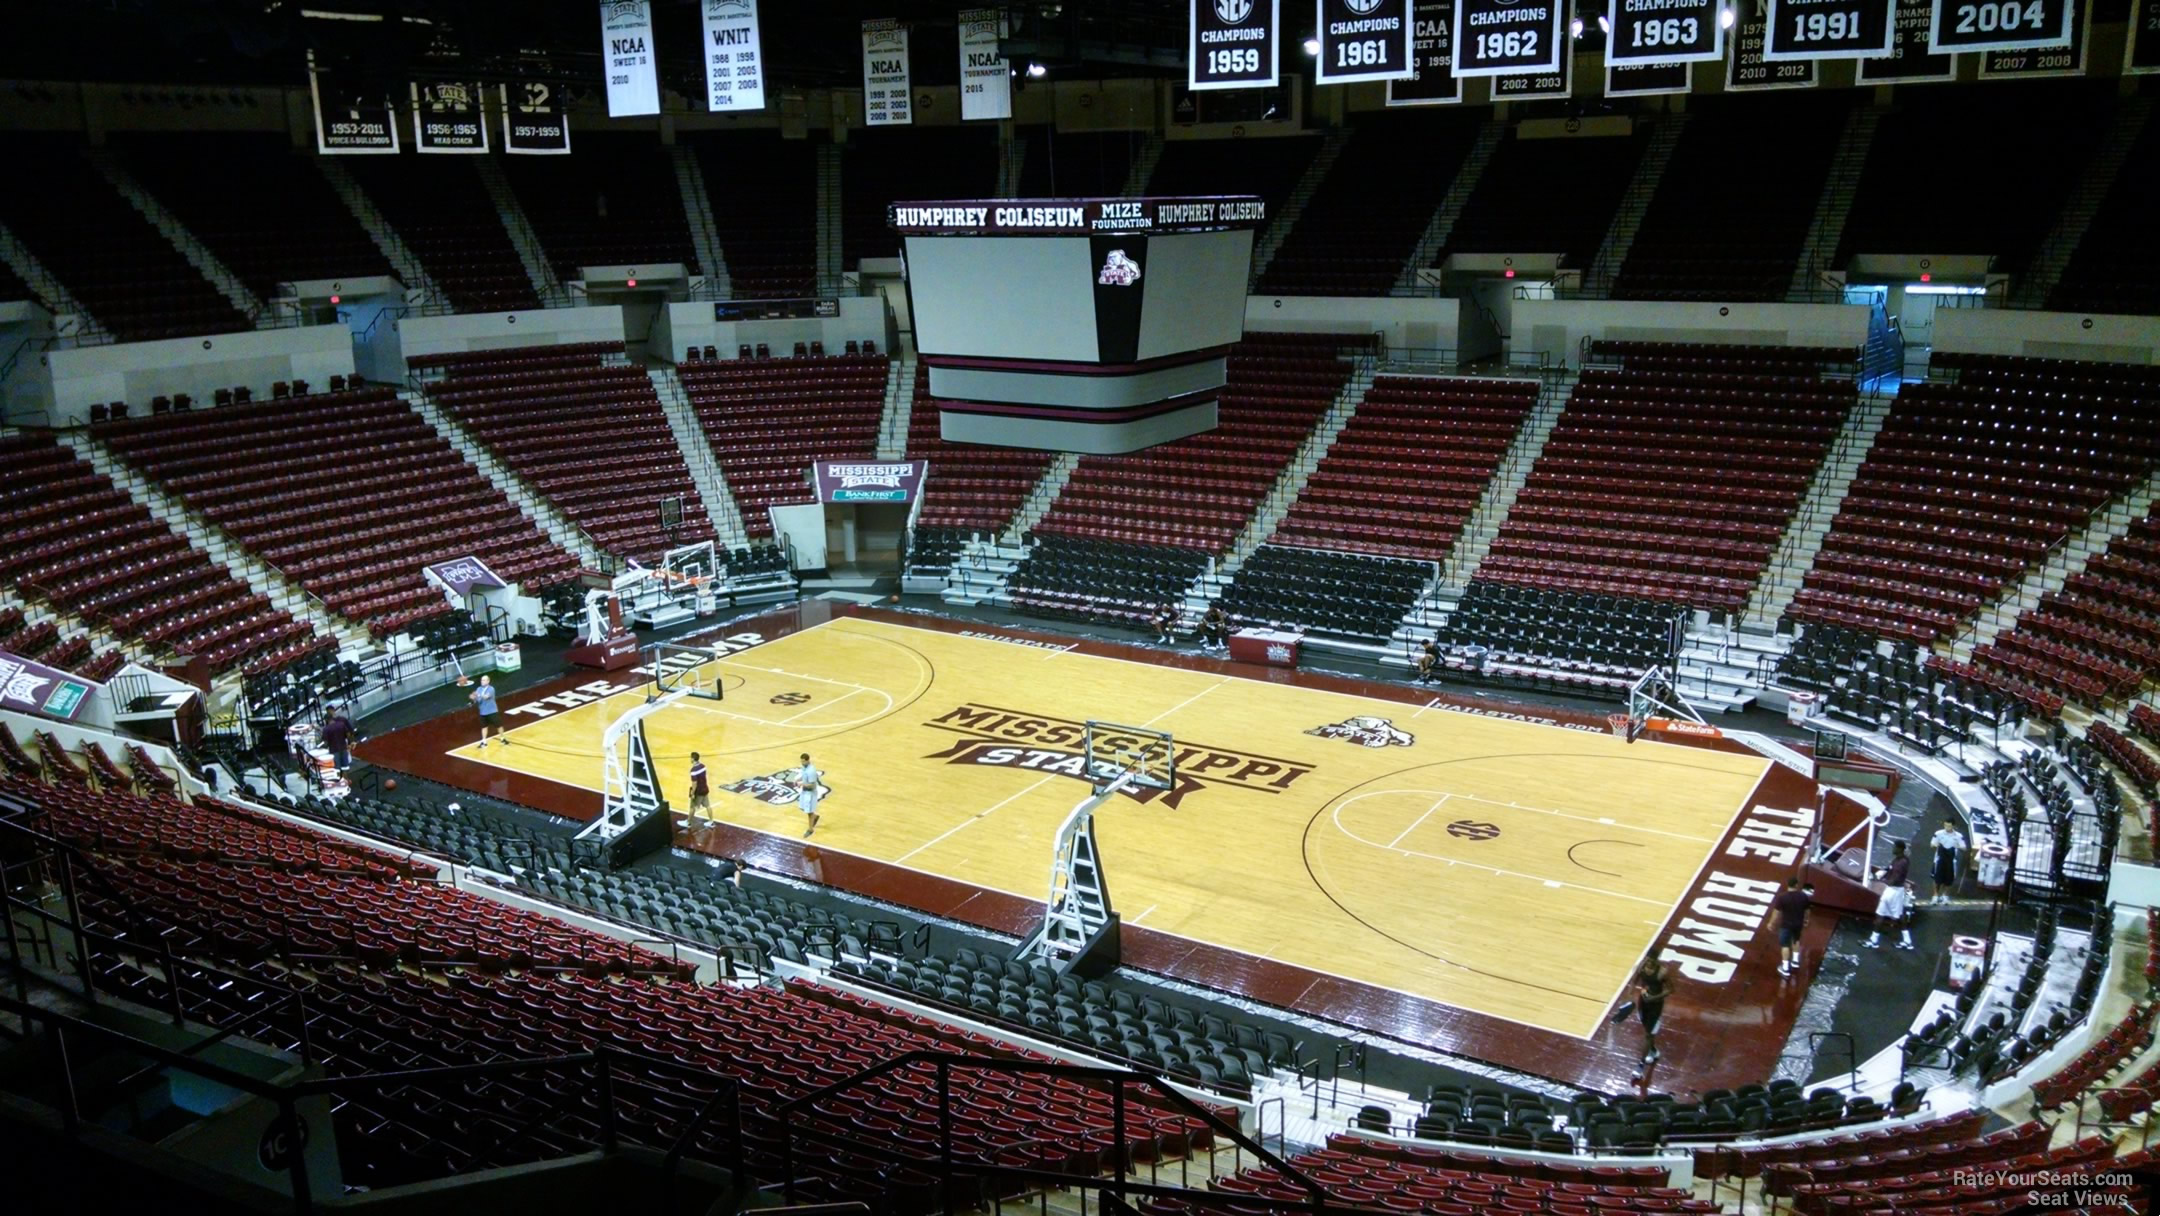 section 207, row 8 seat view  - humphrey coliseum